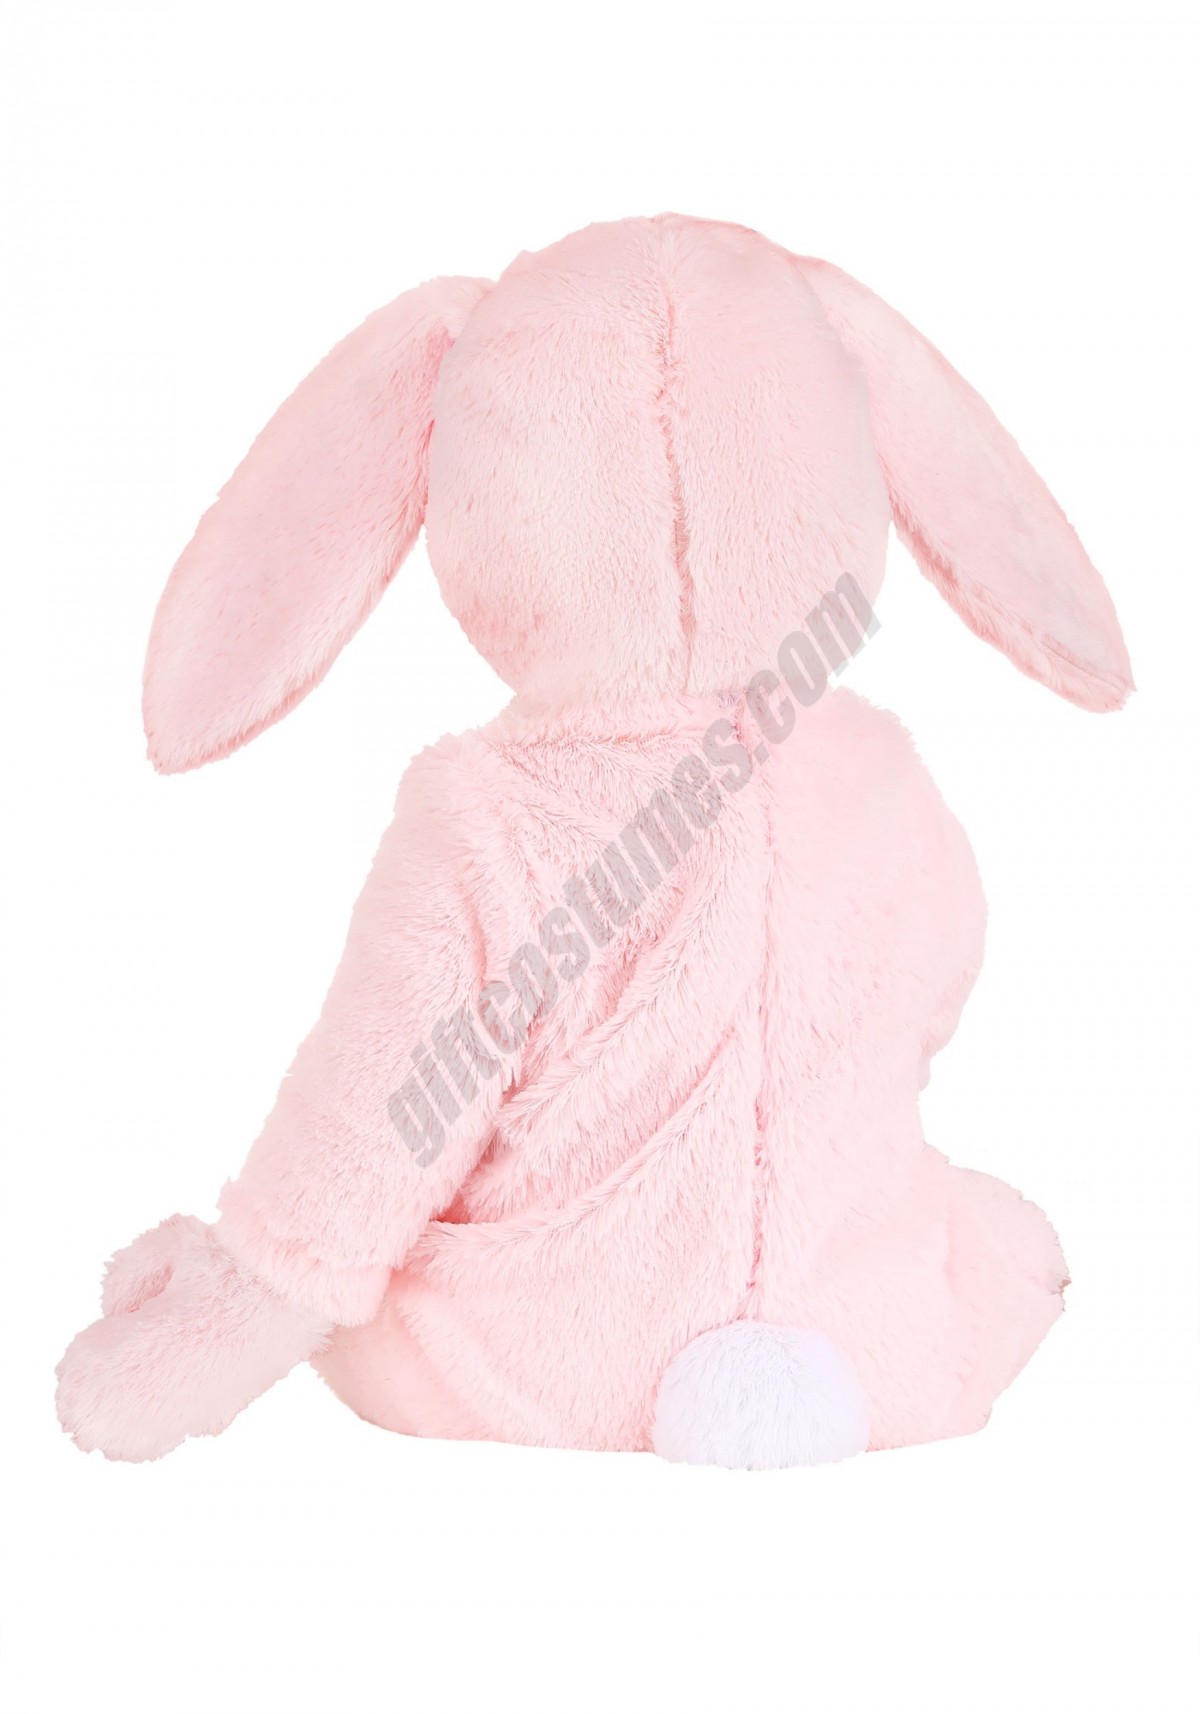 Fluffy Pink Bunny Baby Costume Promotions - -1